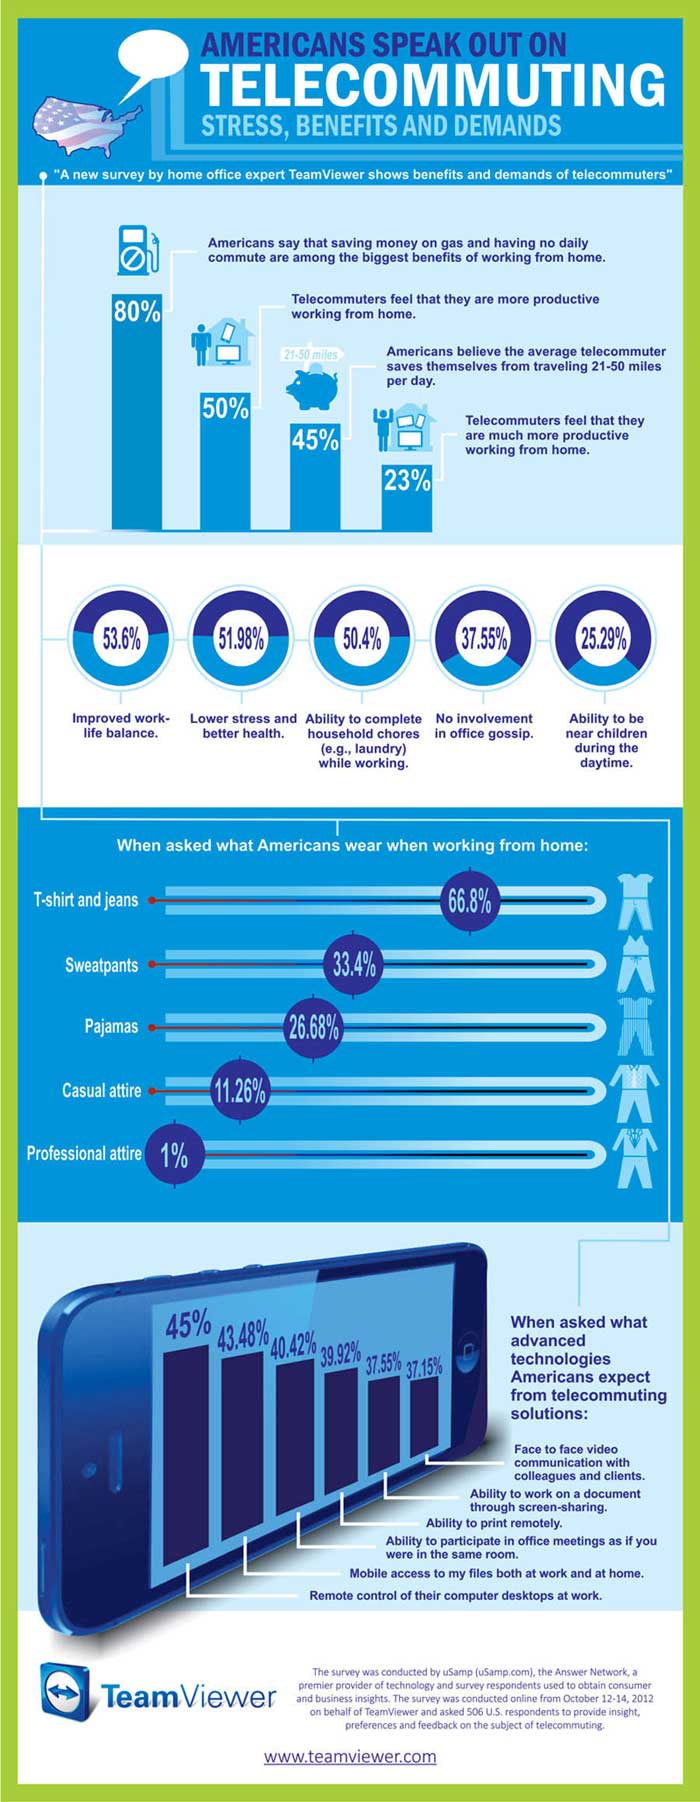 Click on image to view full-size infographic: Survey reveals American telecommuters' inner thoughts and desires.